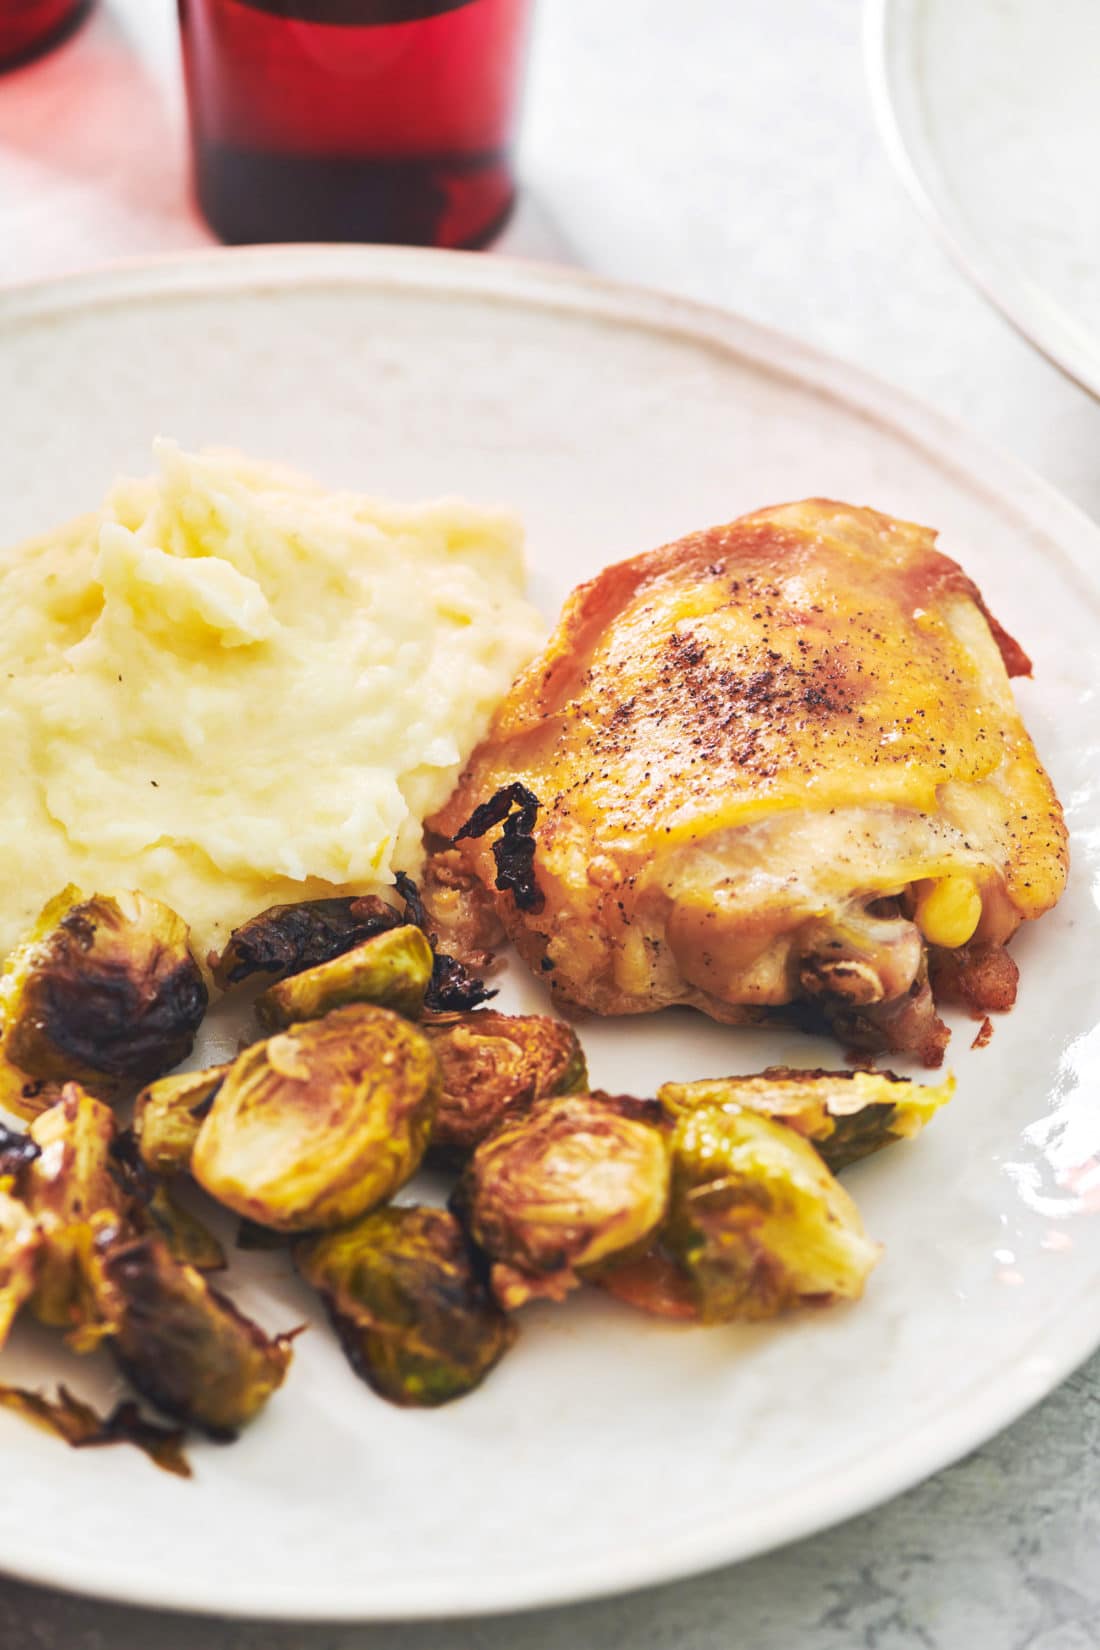 Mashed Potatoes with Parmesan cheese on a plate with roasted chicken and brussels sprouts